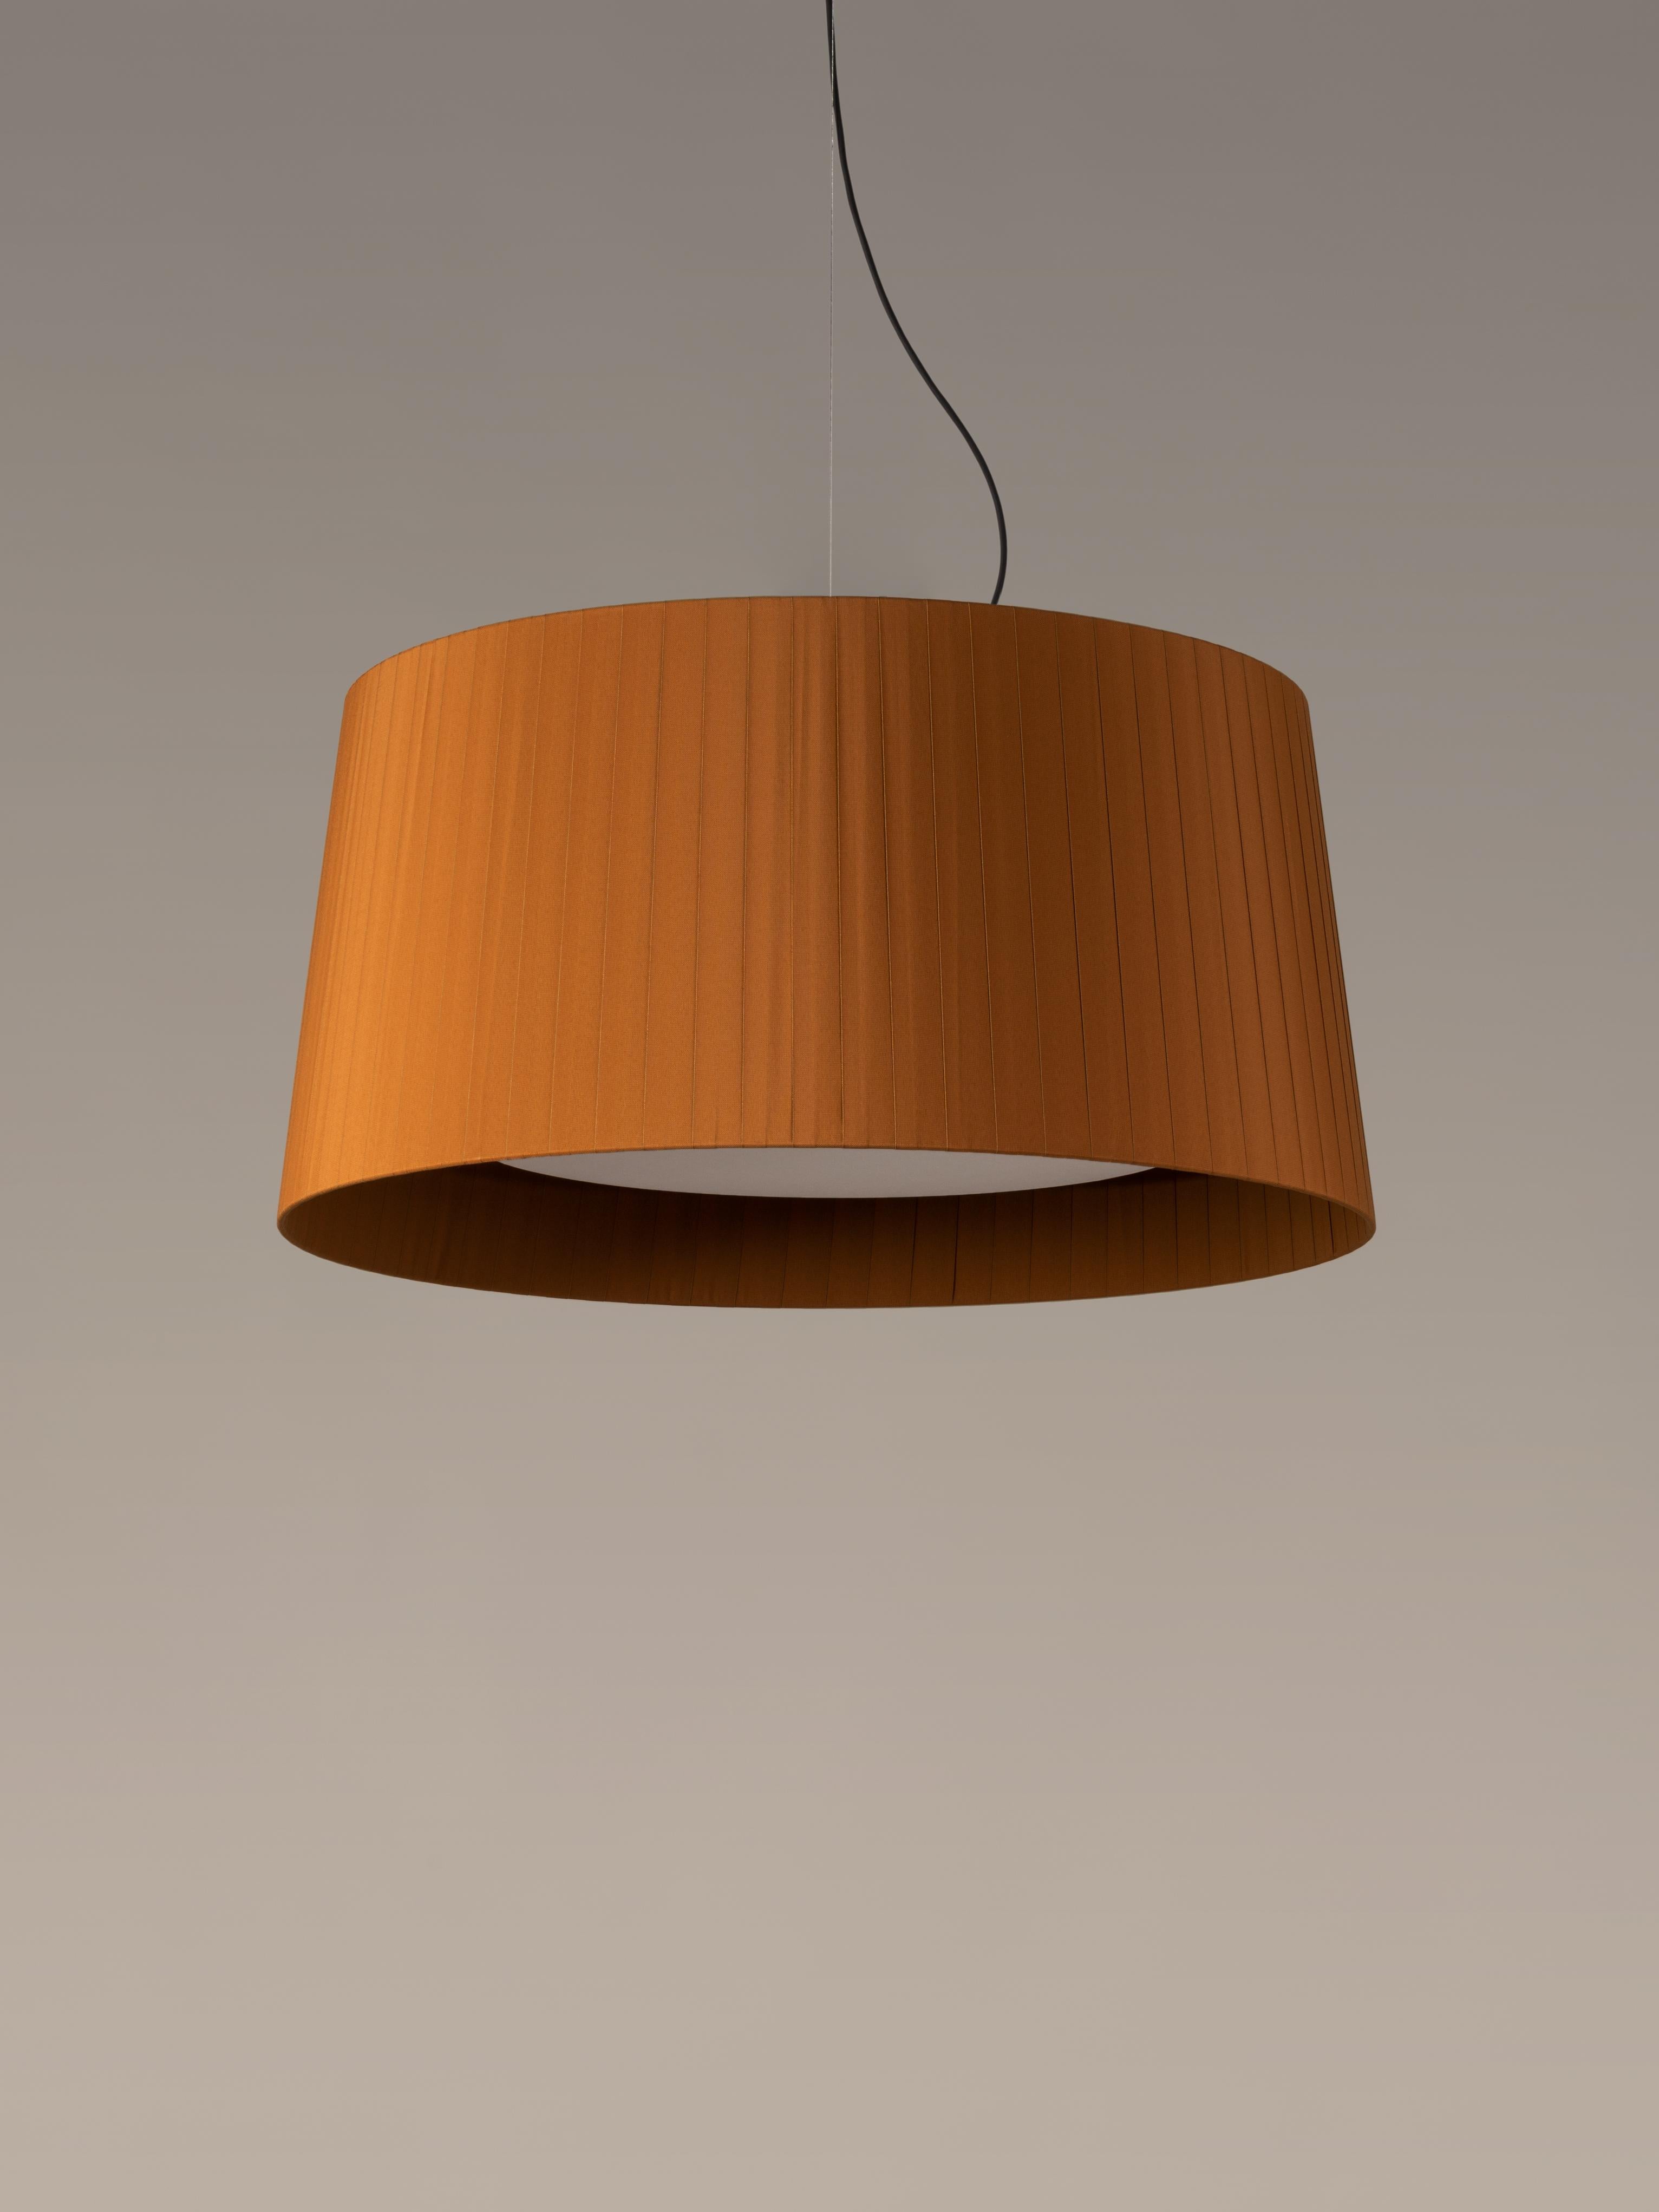 Mustard GT7 pendant lamp by Santa & Cole.
Dimensions: D 90 x H 44 cm.
Materials: Metal, ribbon.
Available in other colors.

Designed for intermediate volumes and domestic areas, GT7 is larger, requiring a reinforced structure that adds a metal